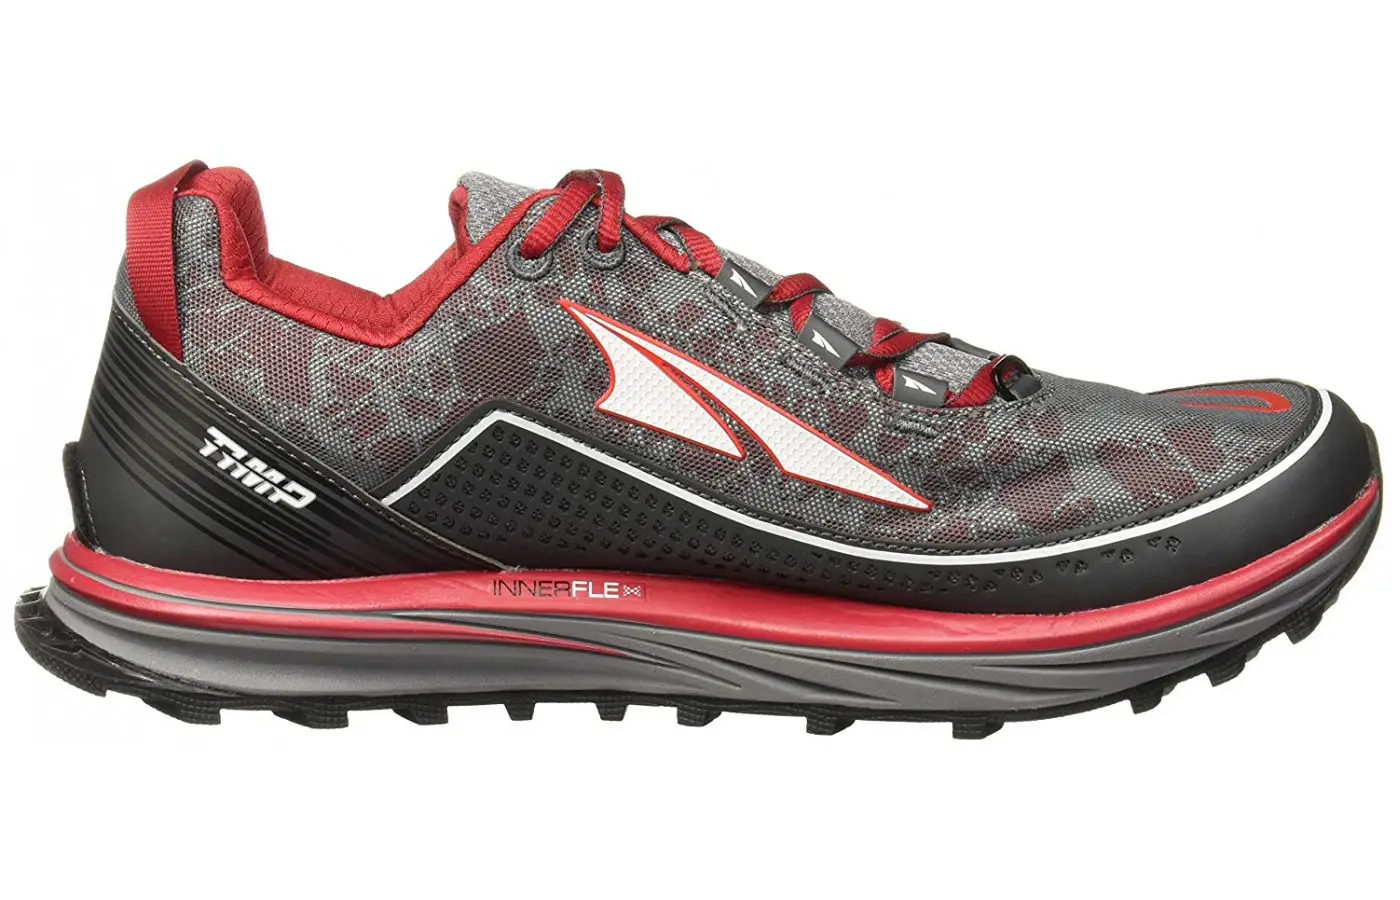 The upper features a unique blend of breathability and protection